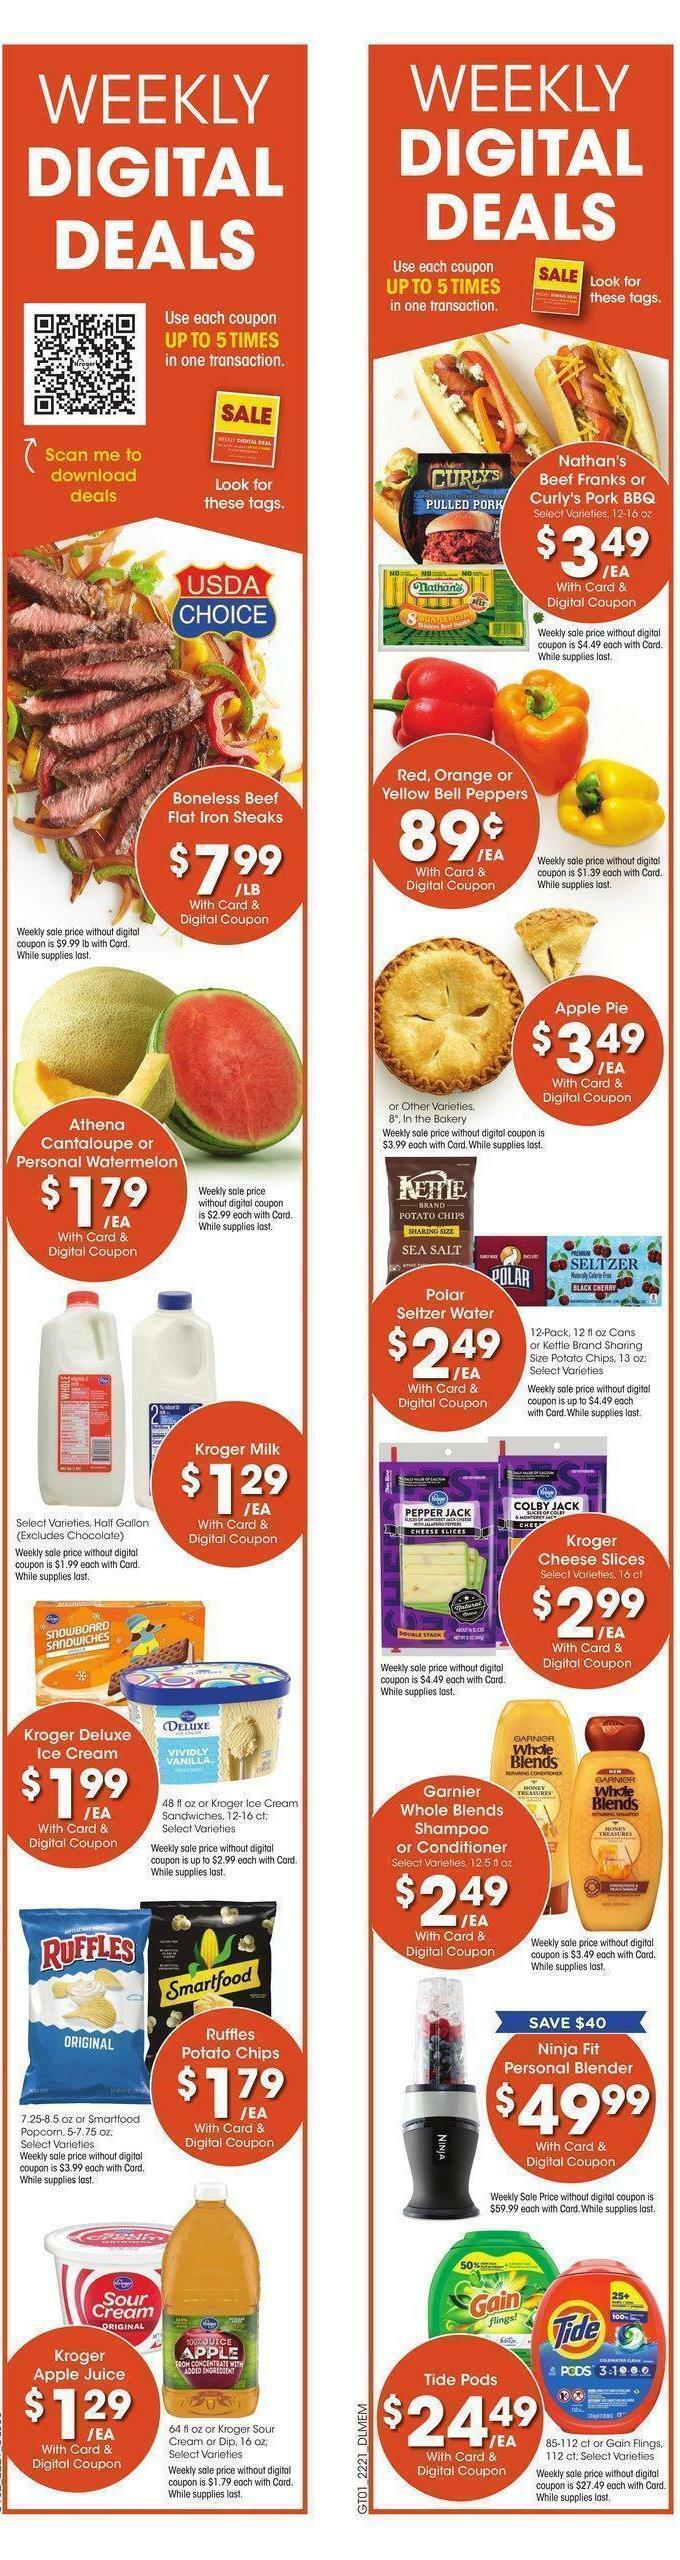 Kroger Weekly Ad from June 22